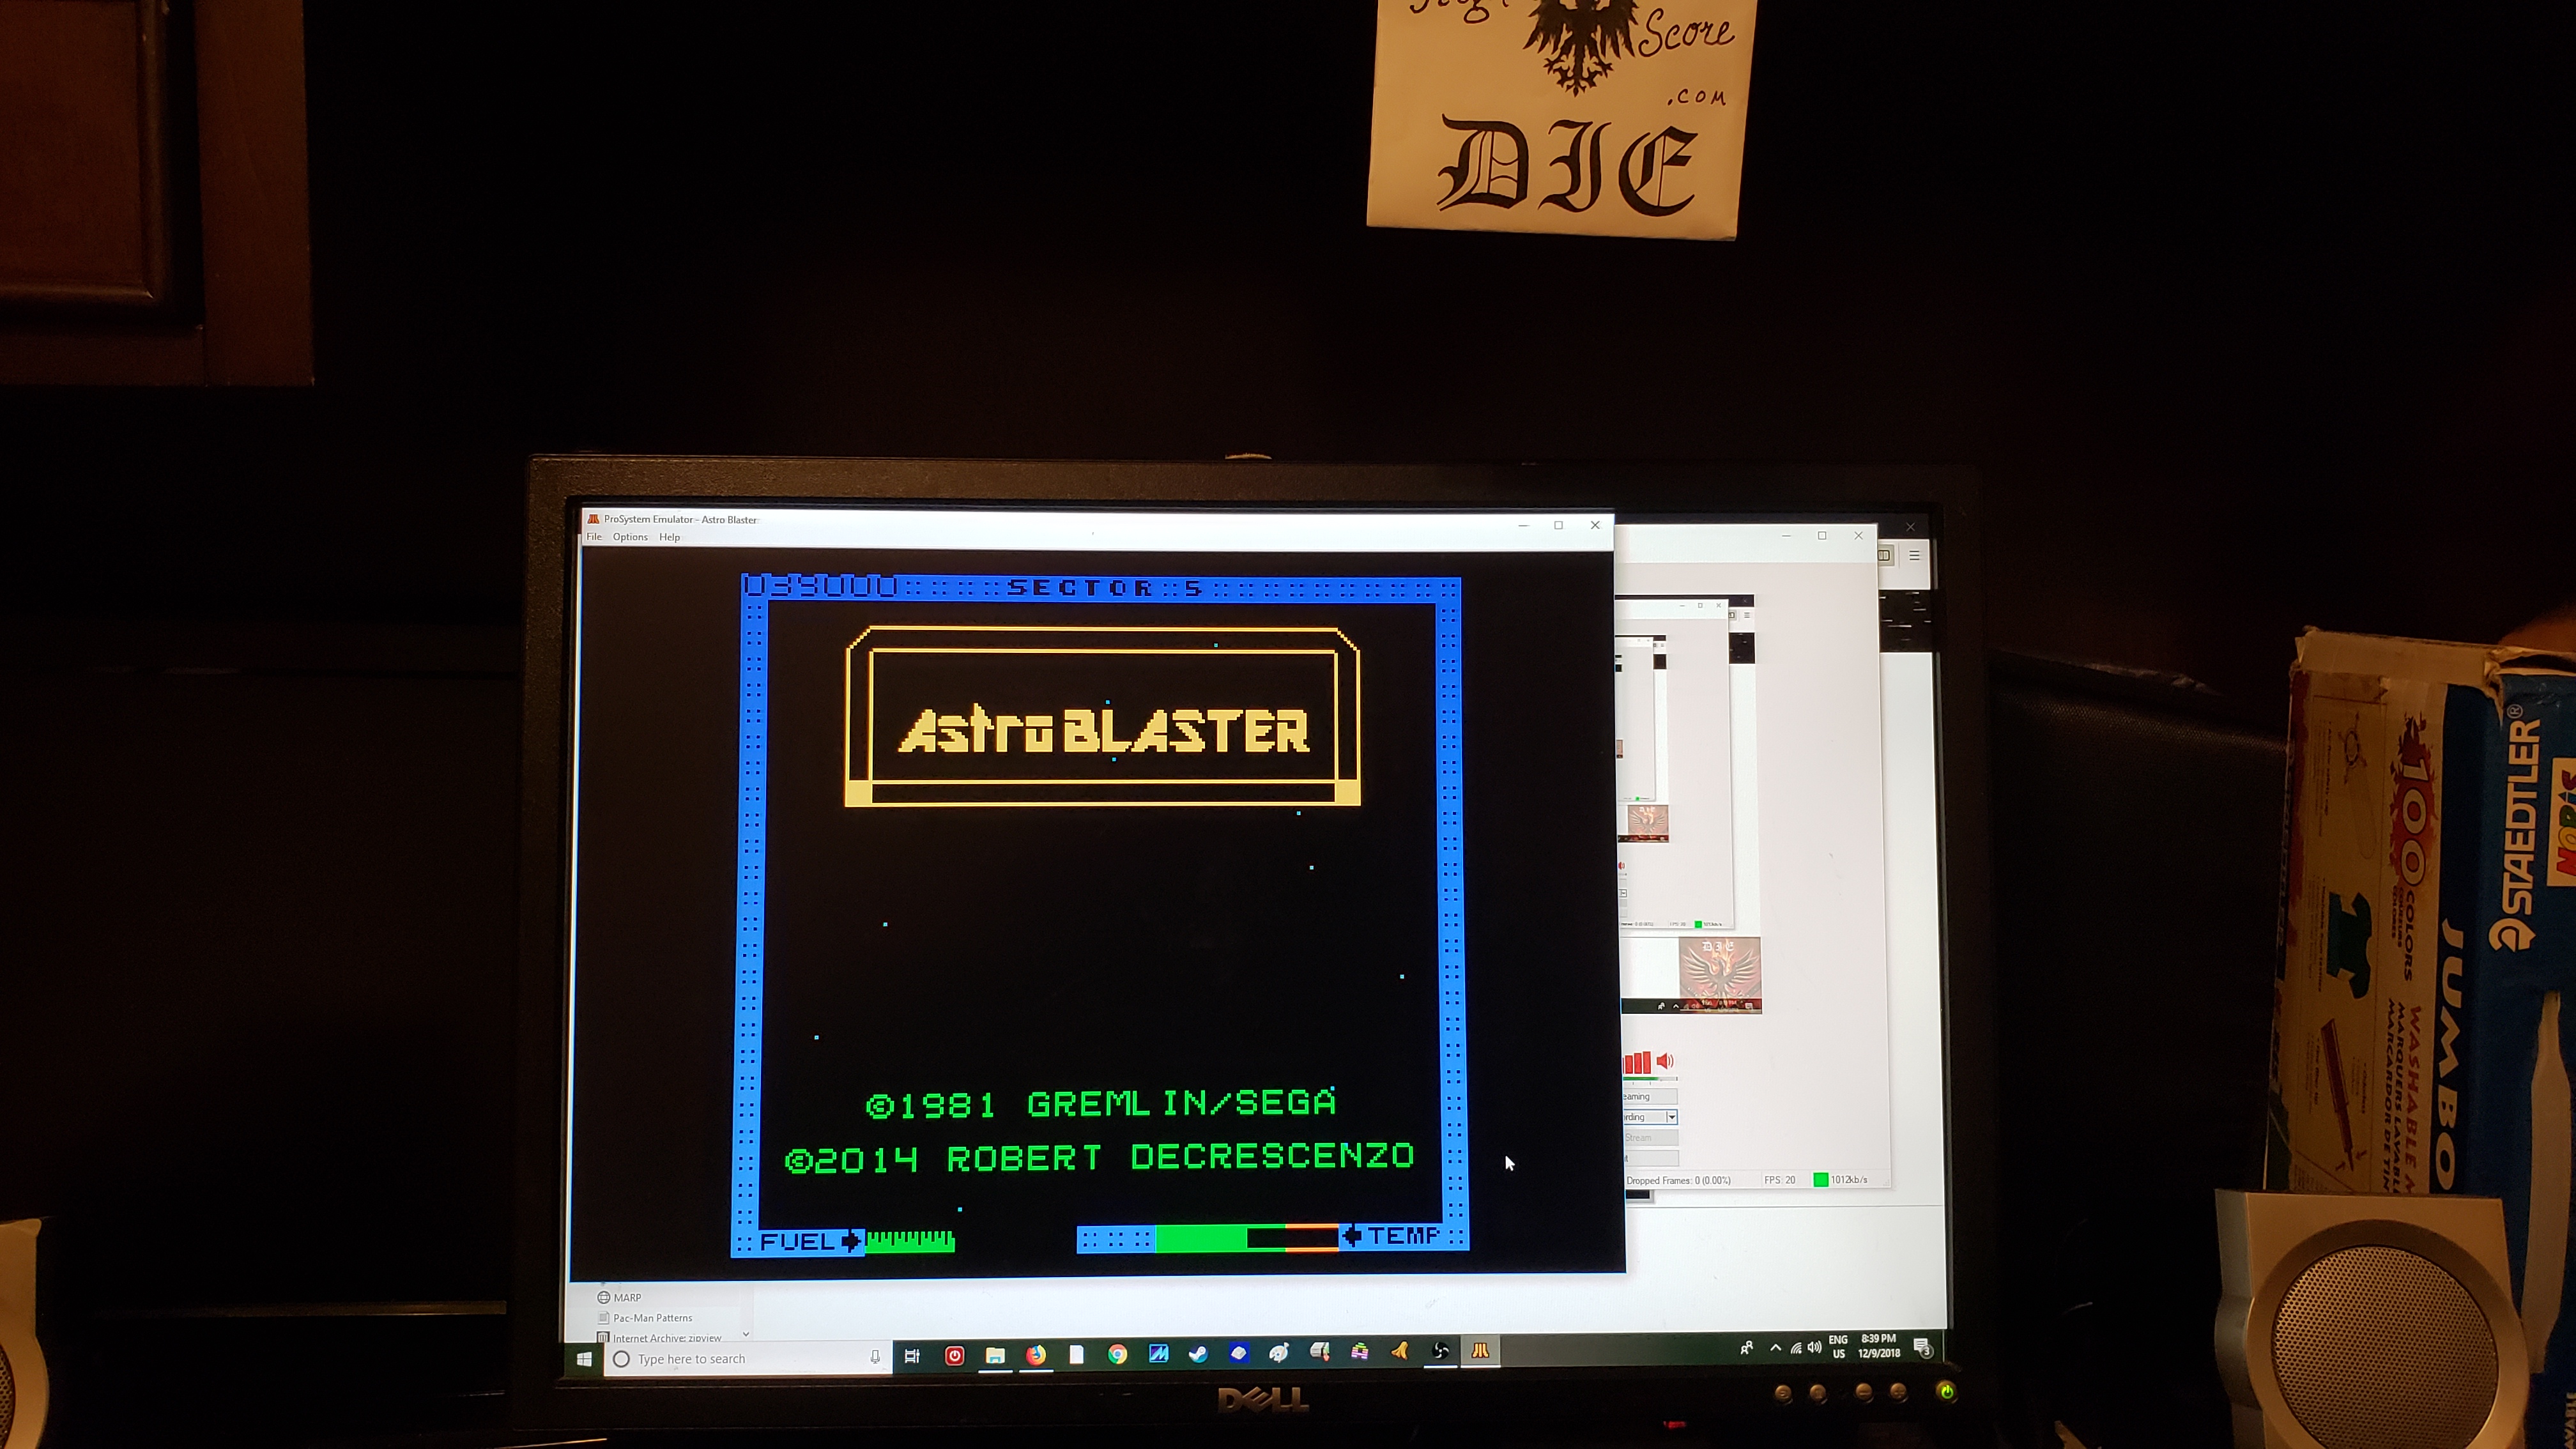 MikeDietrich: Astro Blaster [Easy/5 Lives] (Atari 7800 Emulated) 39,000 points on 2018-12-09 19:40:12